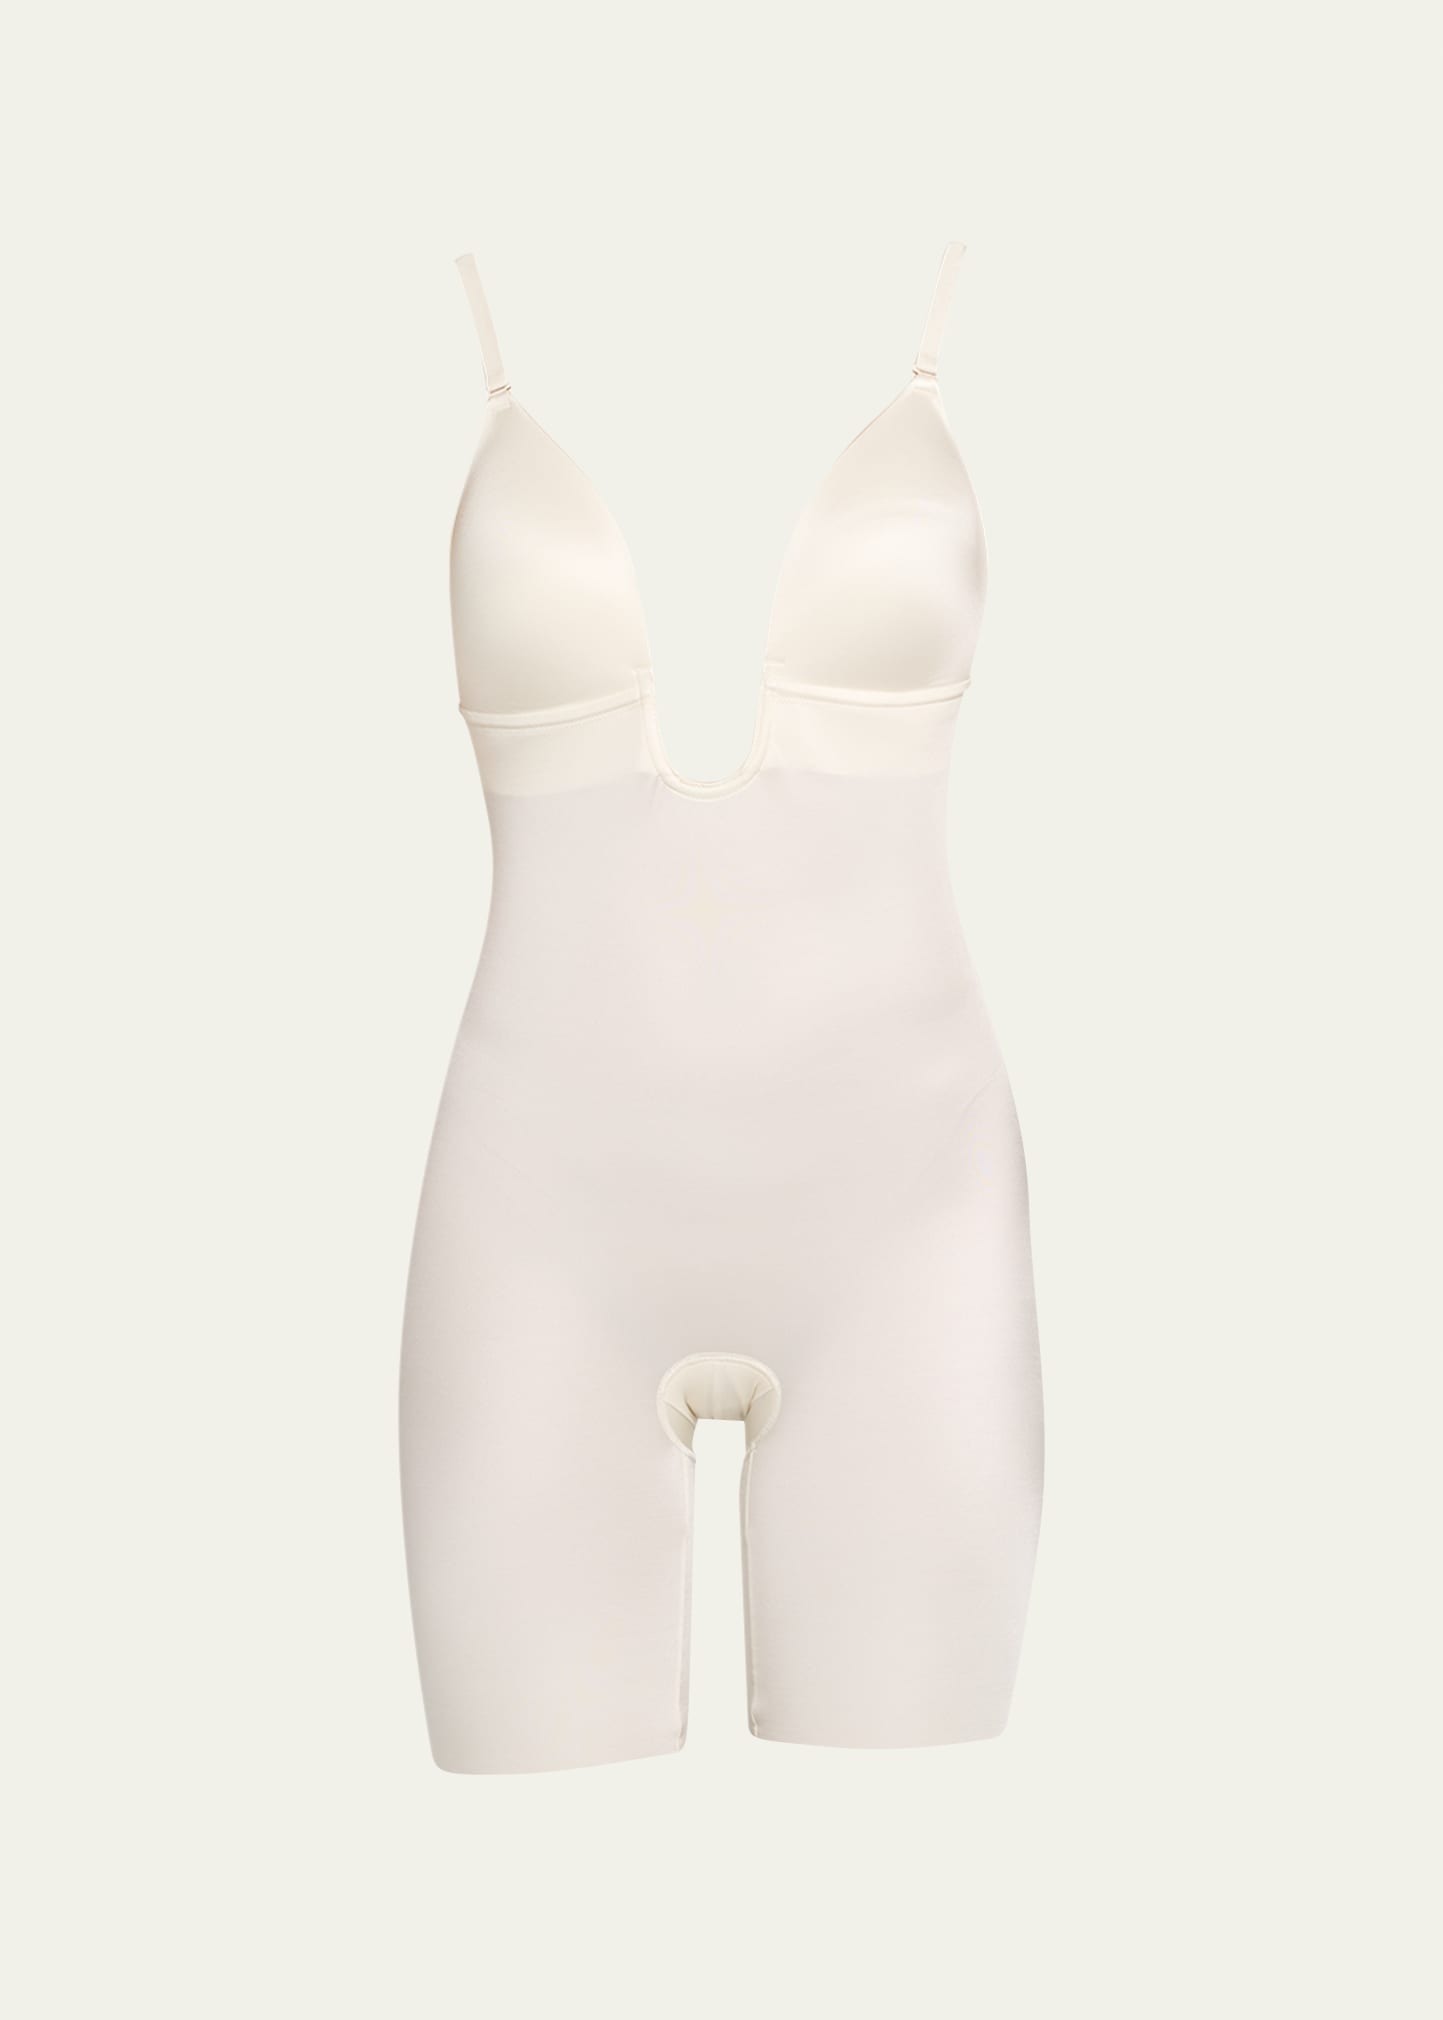 Spanx Suit Your Fancy Strapless Cupped Mid-Thigh Shaping Bodysuit -  Bergdorf Goodman